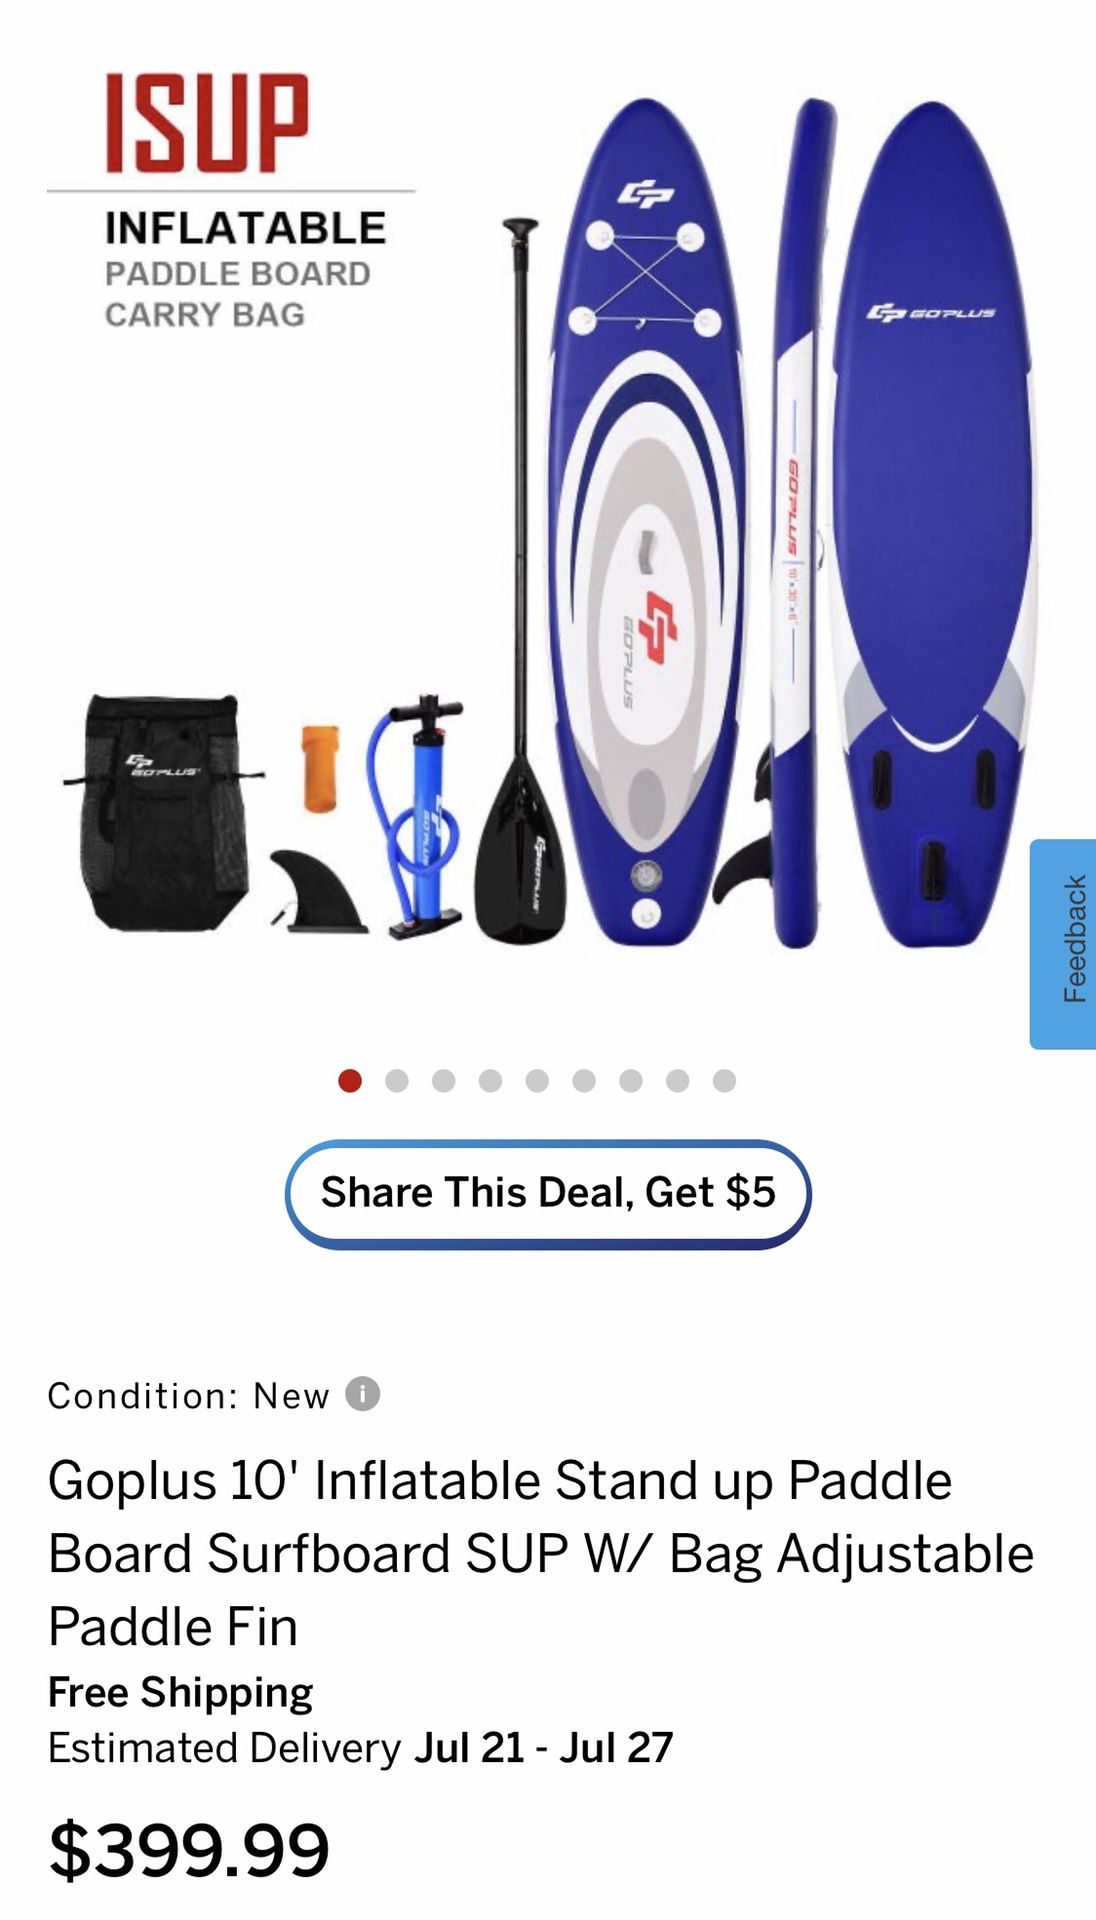 Inflatable stand up paddle board surfboard